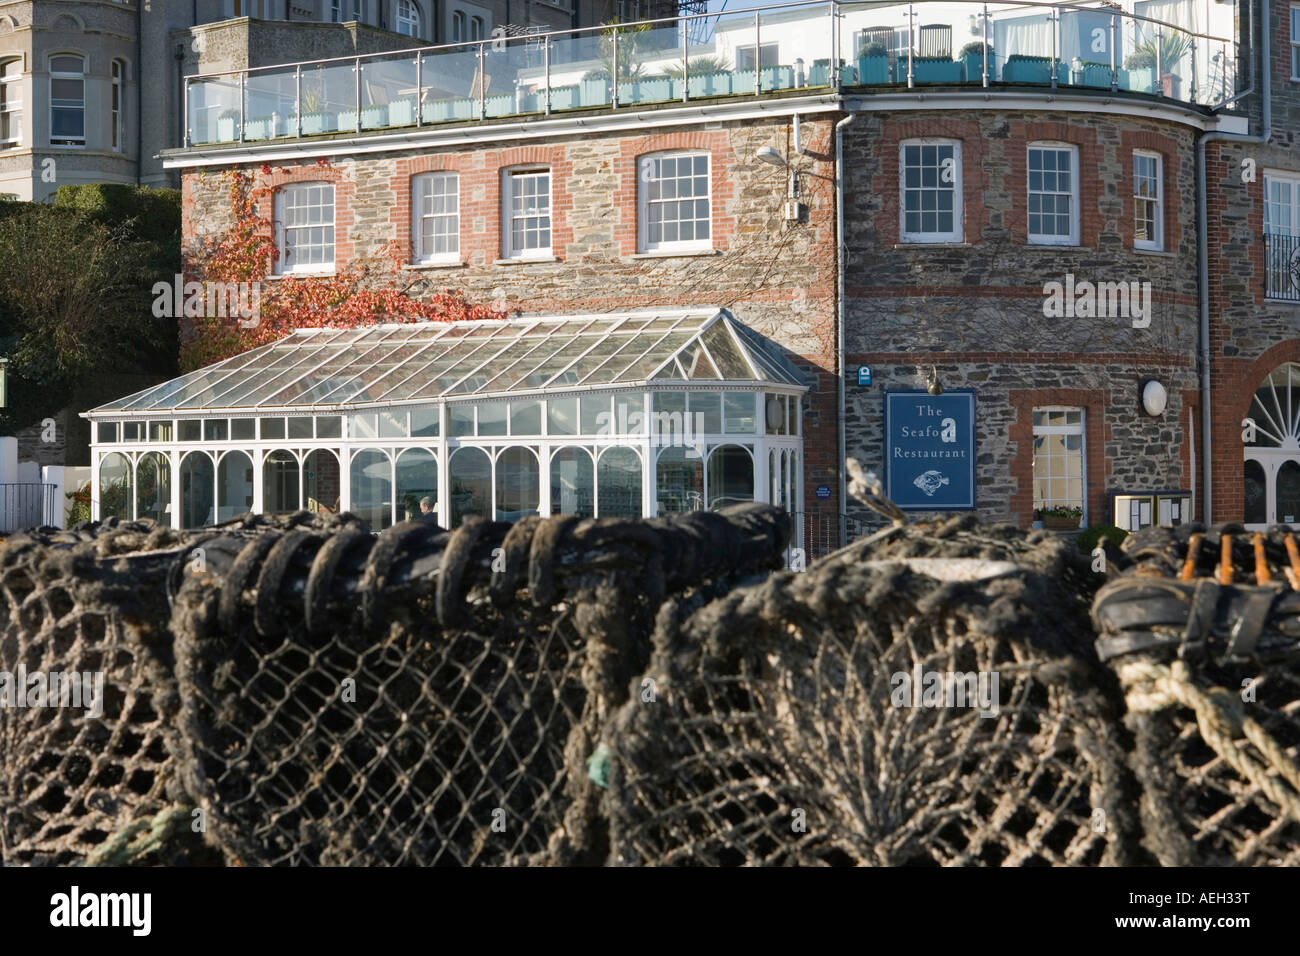 The Seafood Restaurant Padstow Cornwall owner Rick Stein Famous fish restaurant Stock Photo